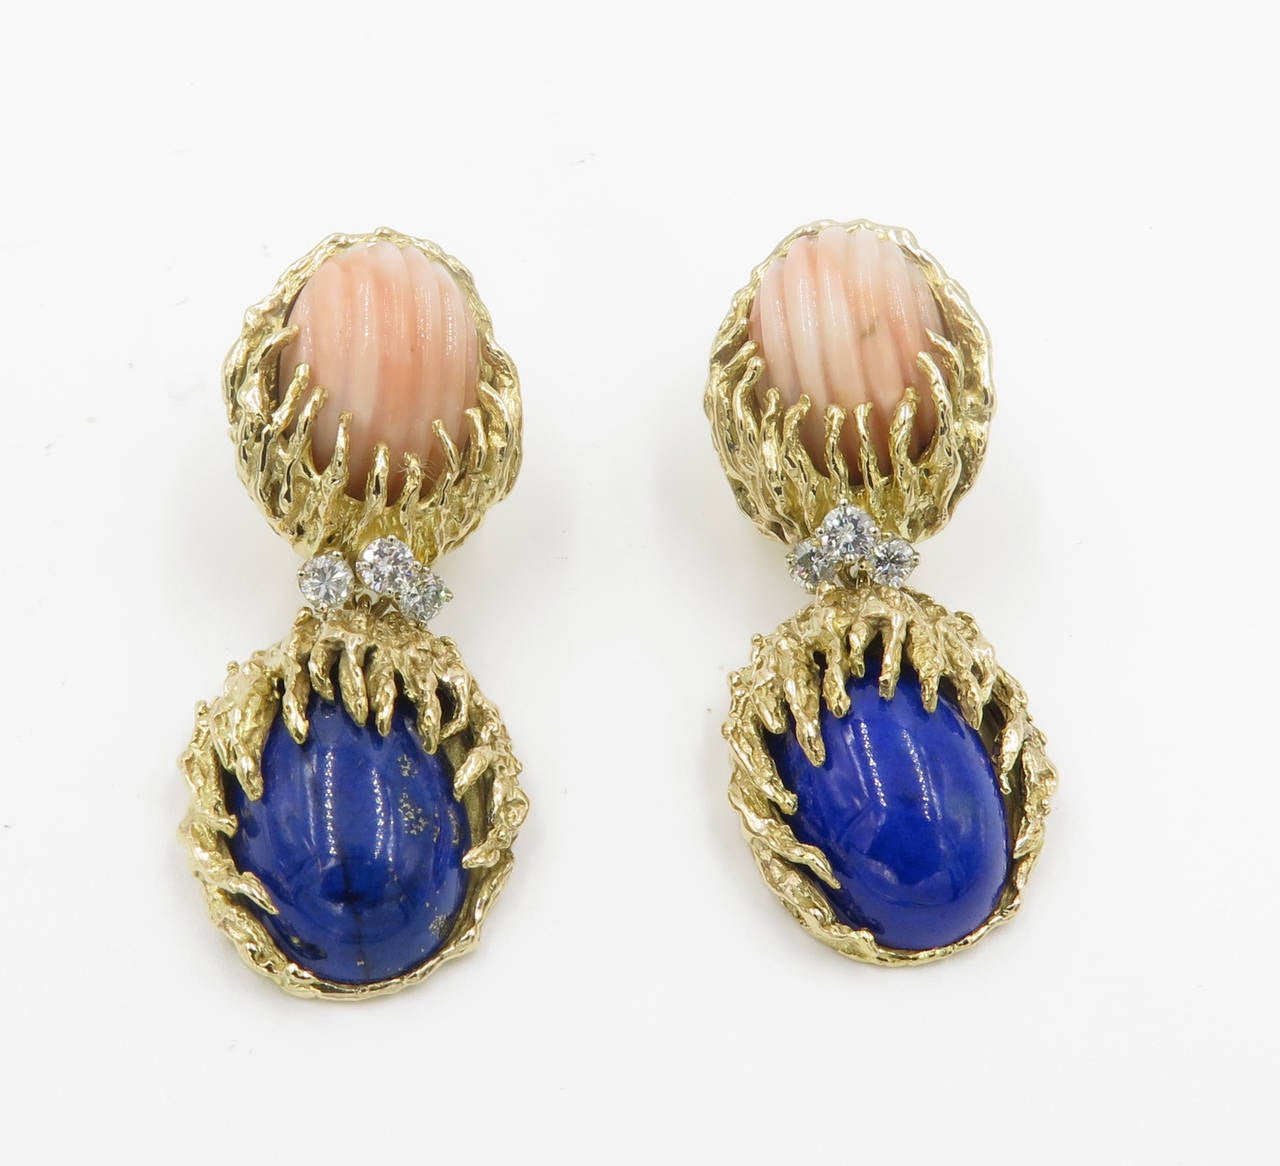 A pair of 14 karat yellow gold, lapis lazuli, coral and diamond earrings, Circa 1960s.  The earrings are designed as a fluted oval cabochon coral suspending a section of 3 diamonds and a cabochon oval lapis lazuli.  The 6 round brilliant cut